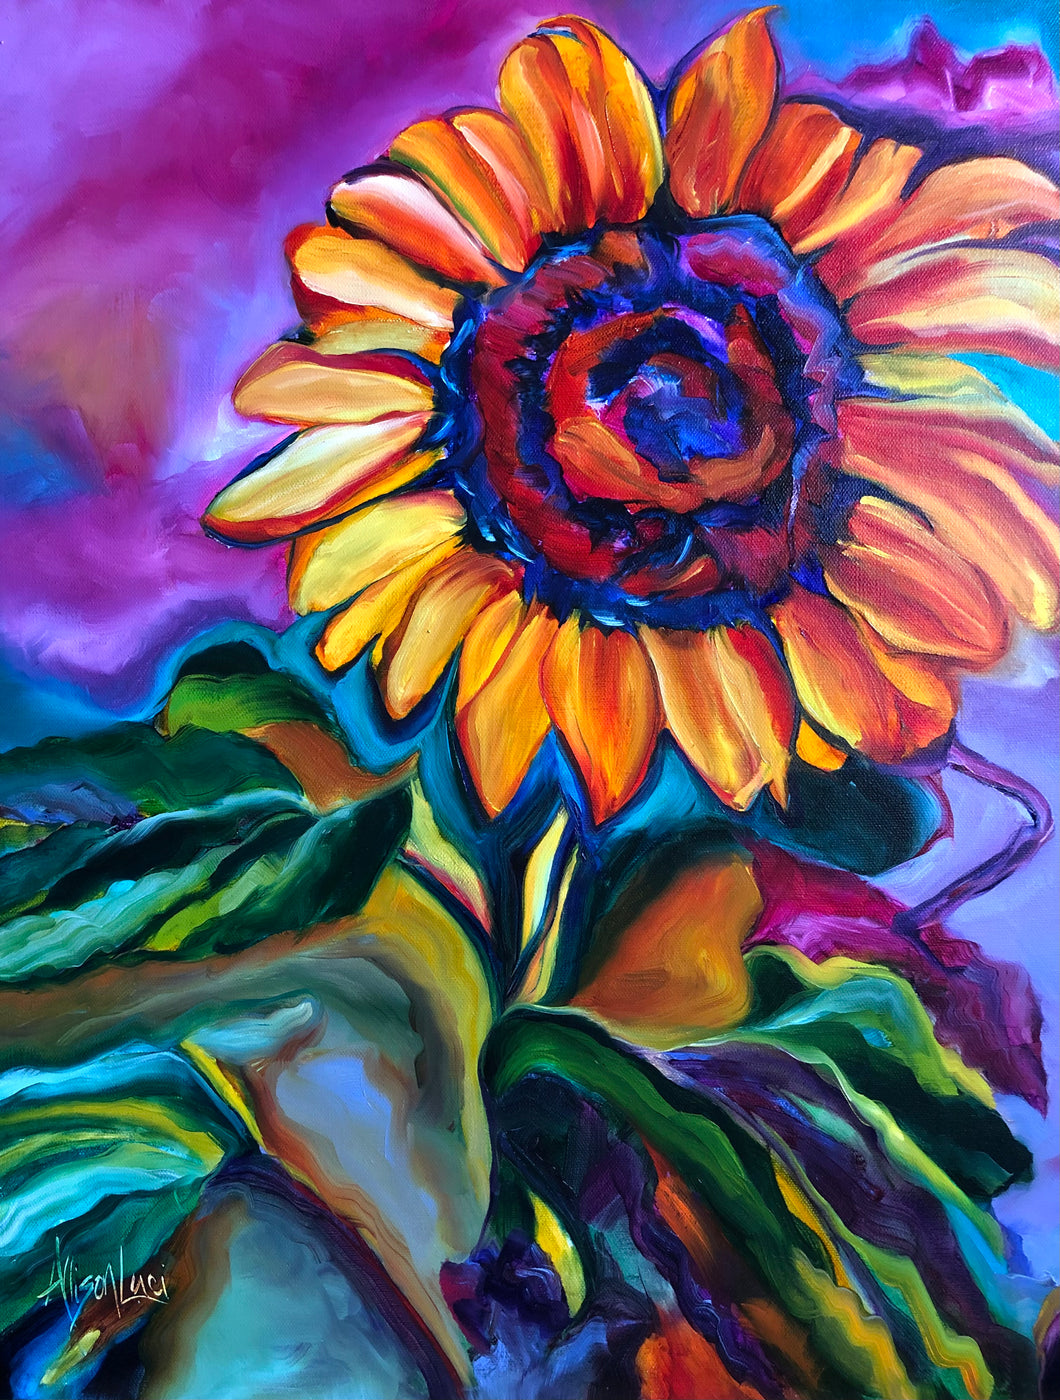 Psychedelic Sunflower Oil Painting Giclee Print on Paper - multiple sizes - Bold Bright Flower Art Print